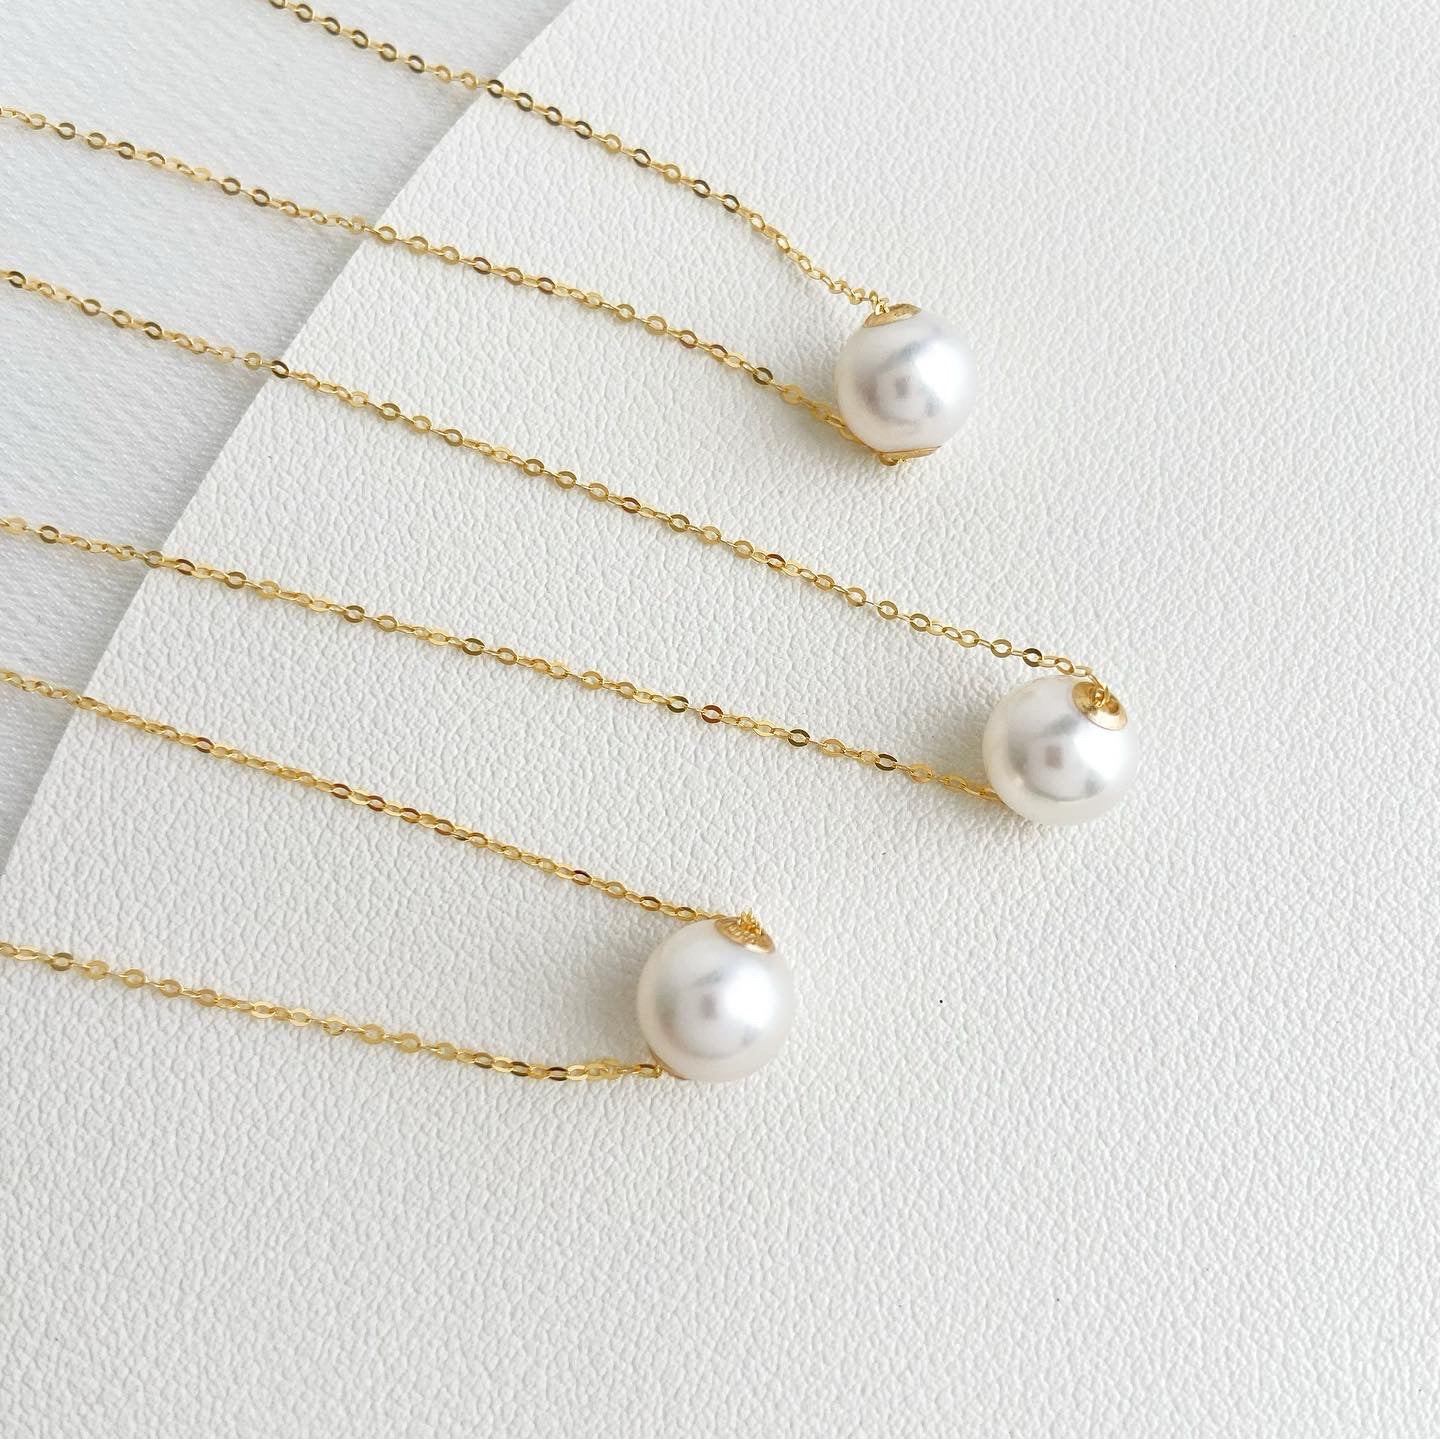 Akoya Floating Pearl Necklace in 18k Gold